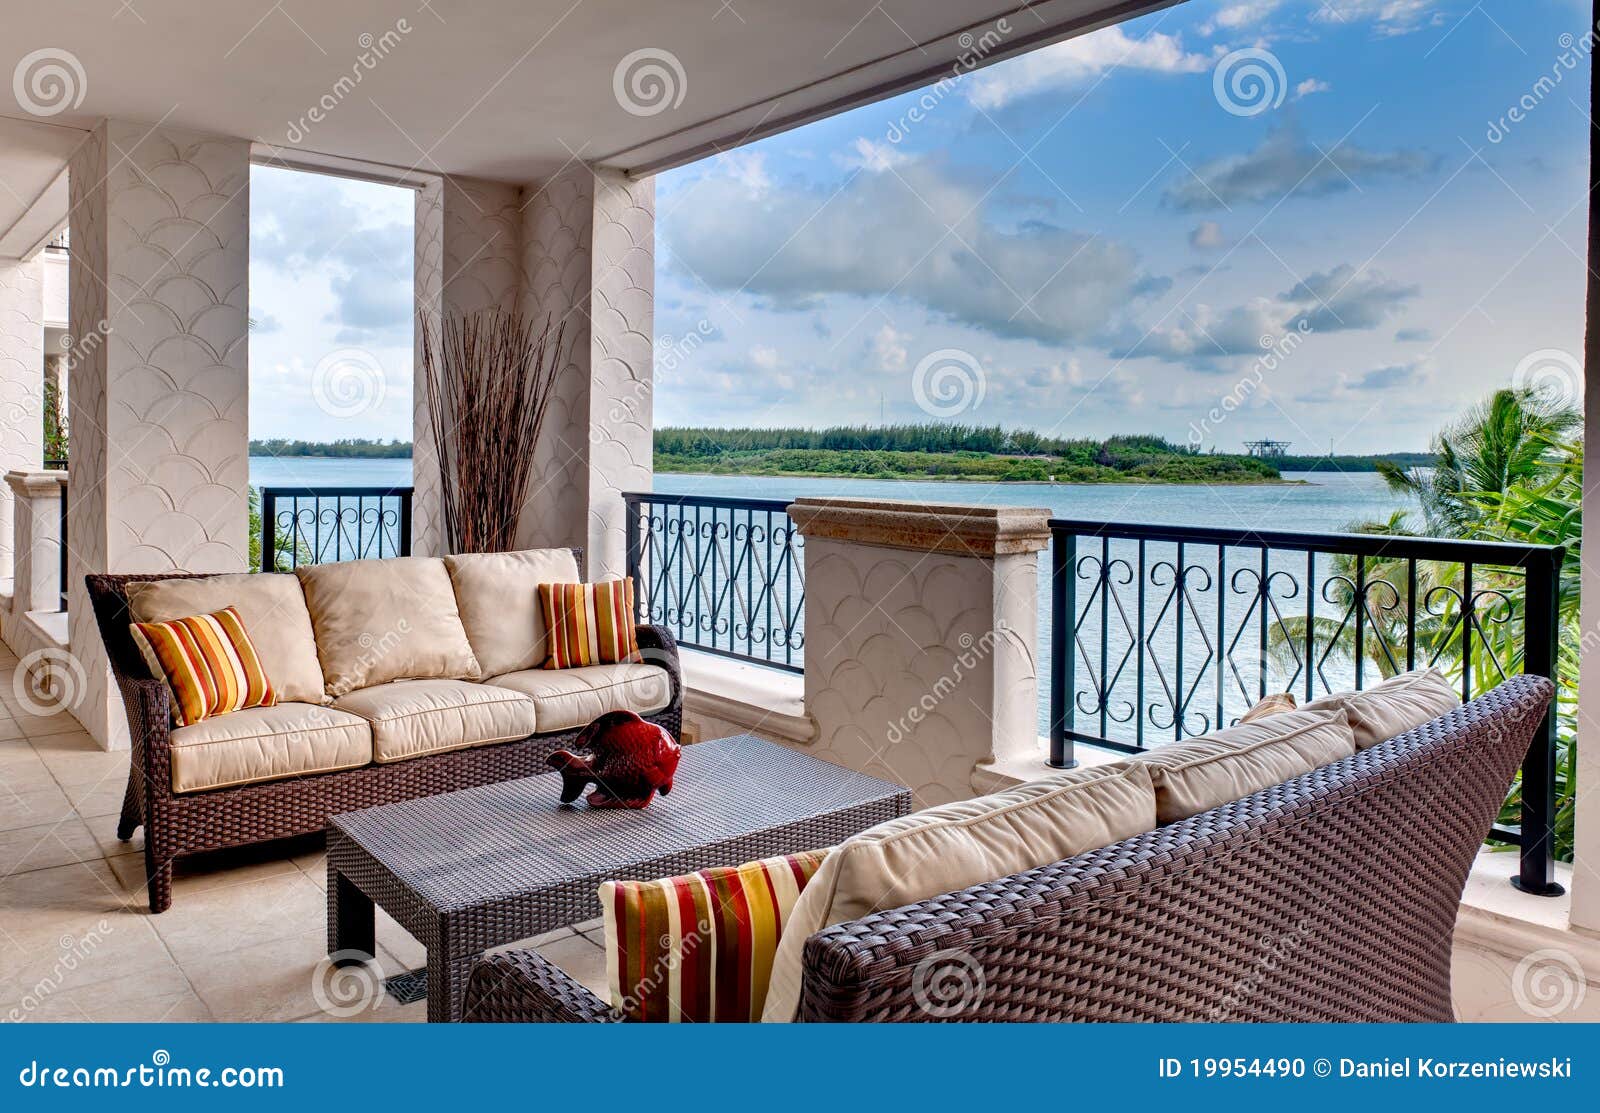 furnished ocean view terrace